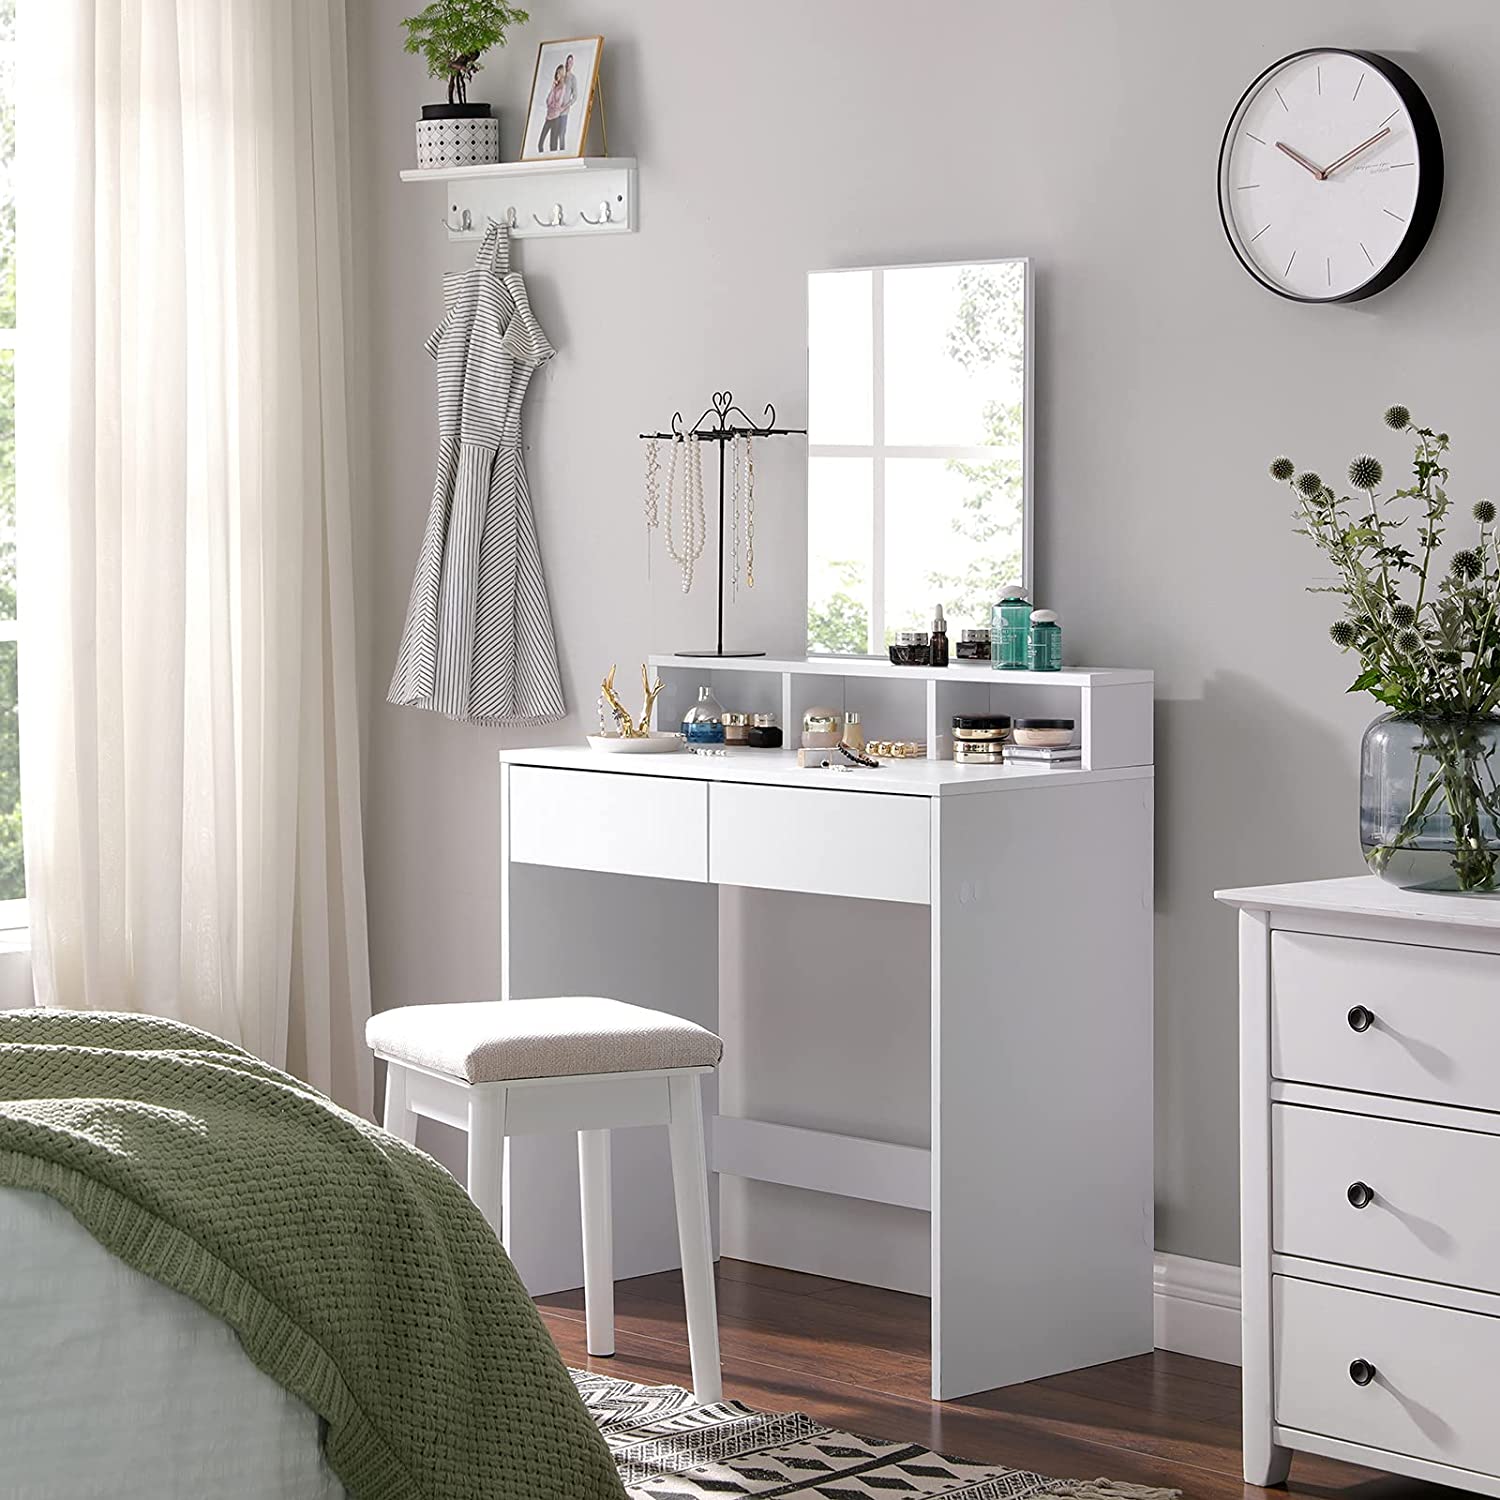 Nancy's Caccile Dressing Table - Comestica Table - Make-Up Table - 2 Drawers - Mirror - Open Compartments - Engineered Wood - White - 80 x 40 x 140 cm